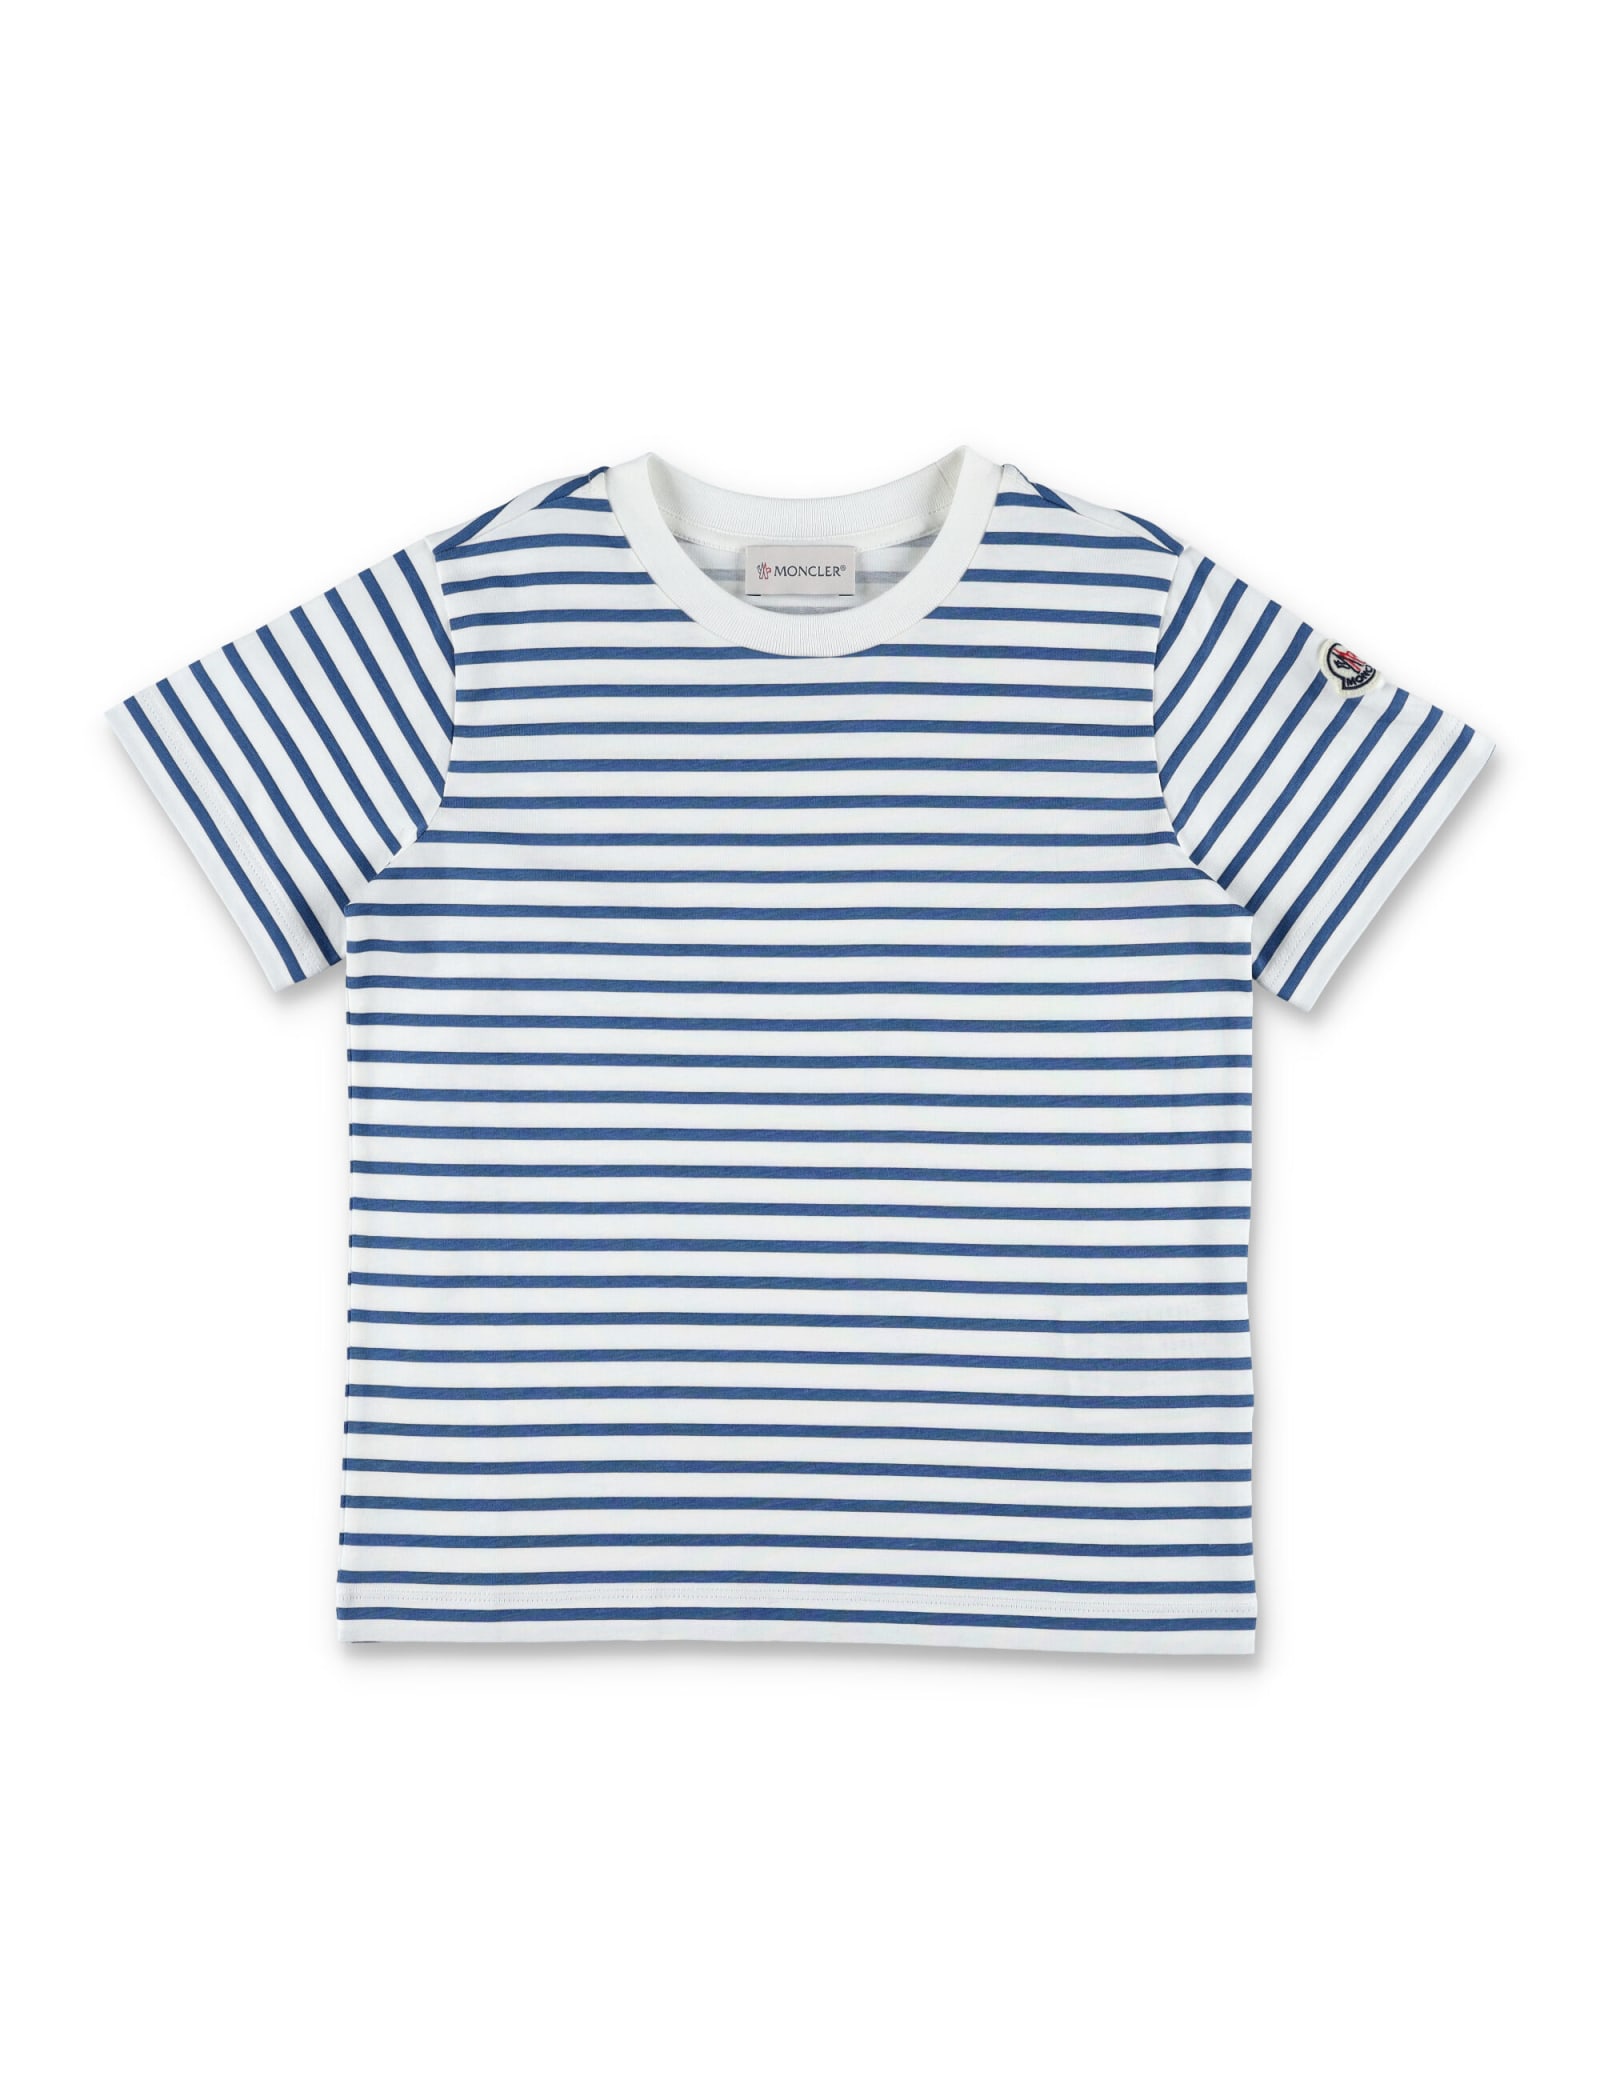 Moncler Kids' Striped T-shirt In Multicolor